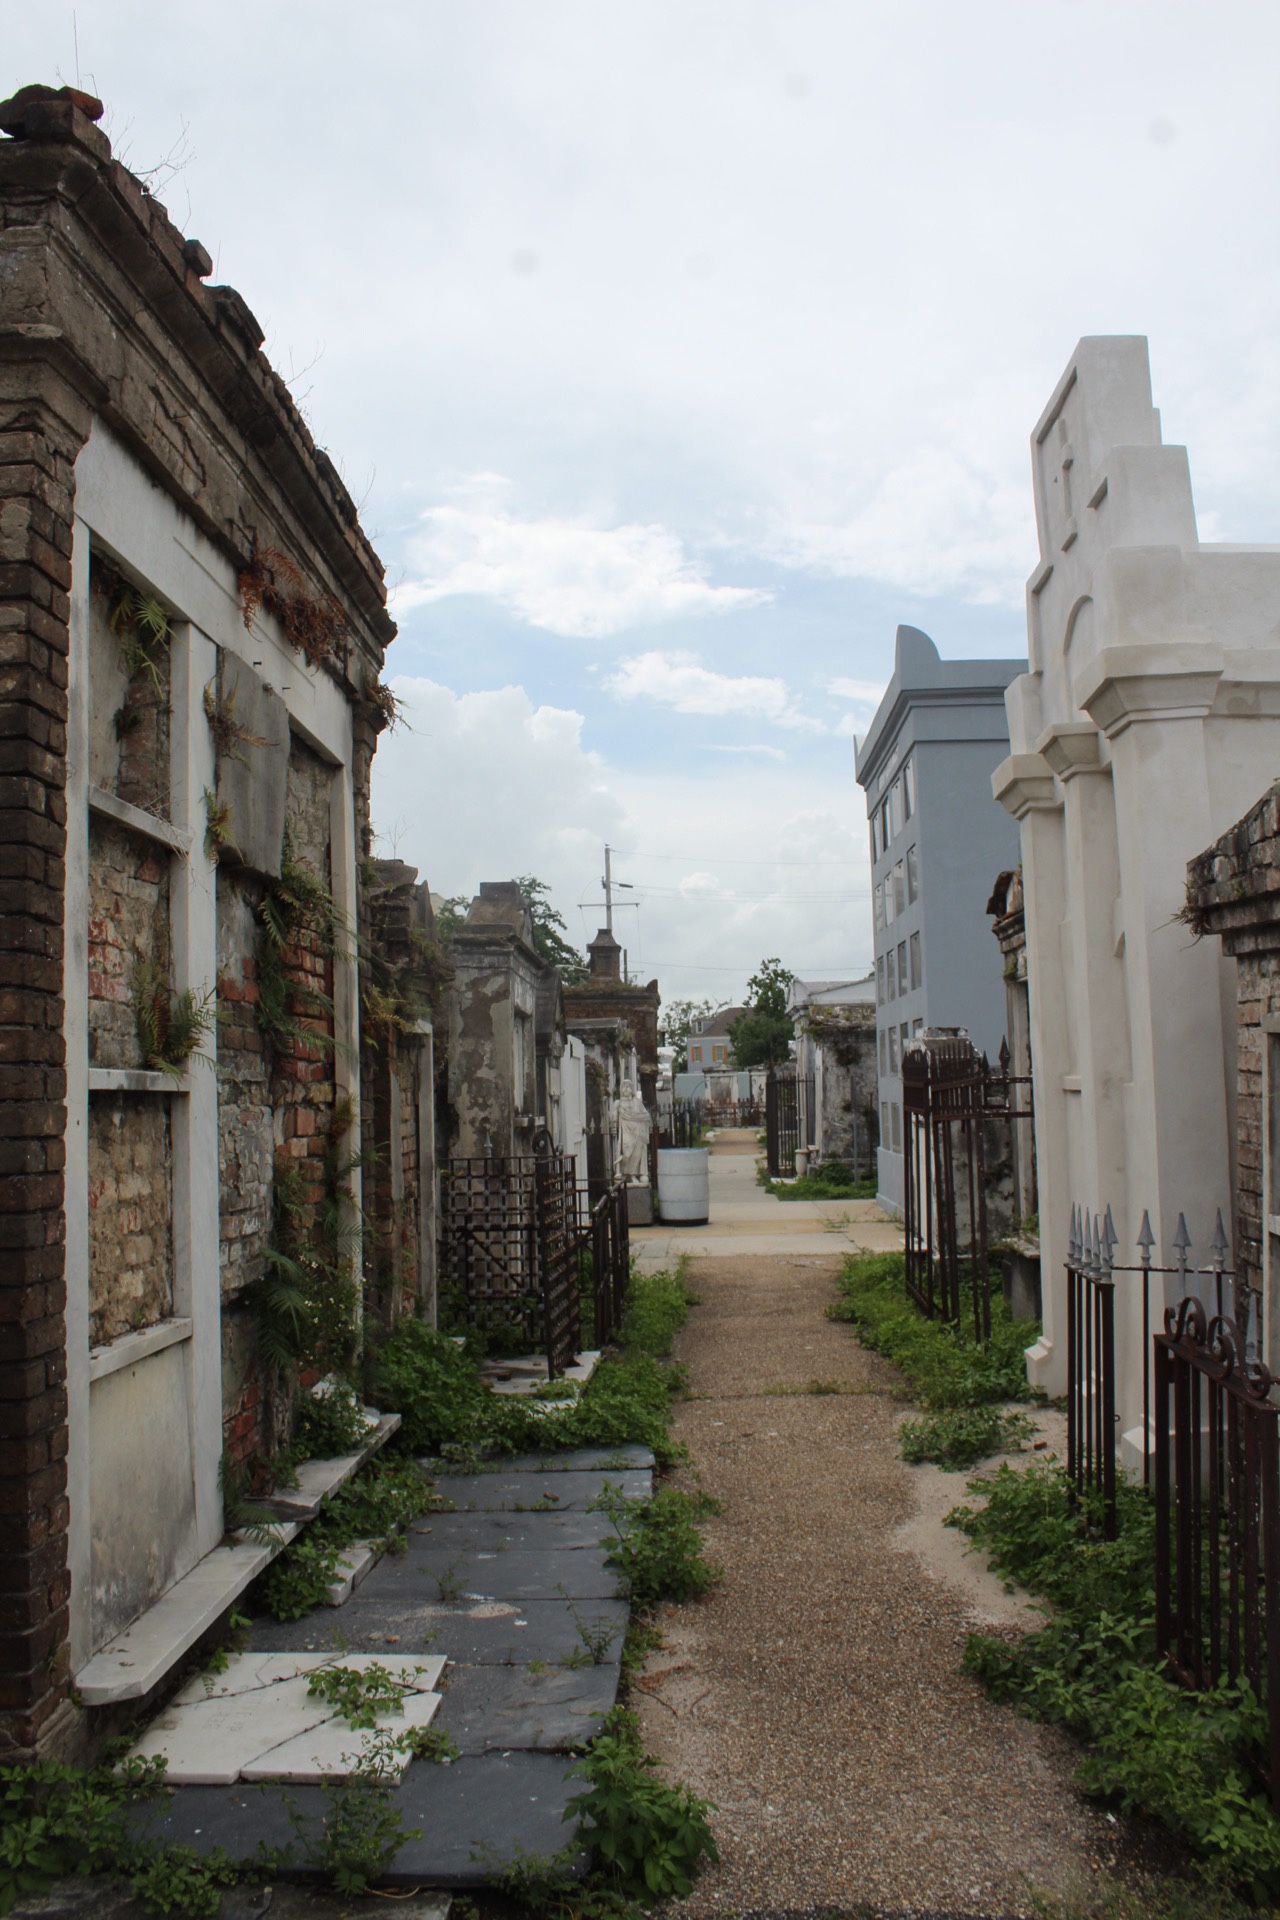 Exploring History and Mystery: St. Louis Cemetery #1 in New Orleans